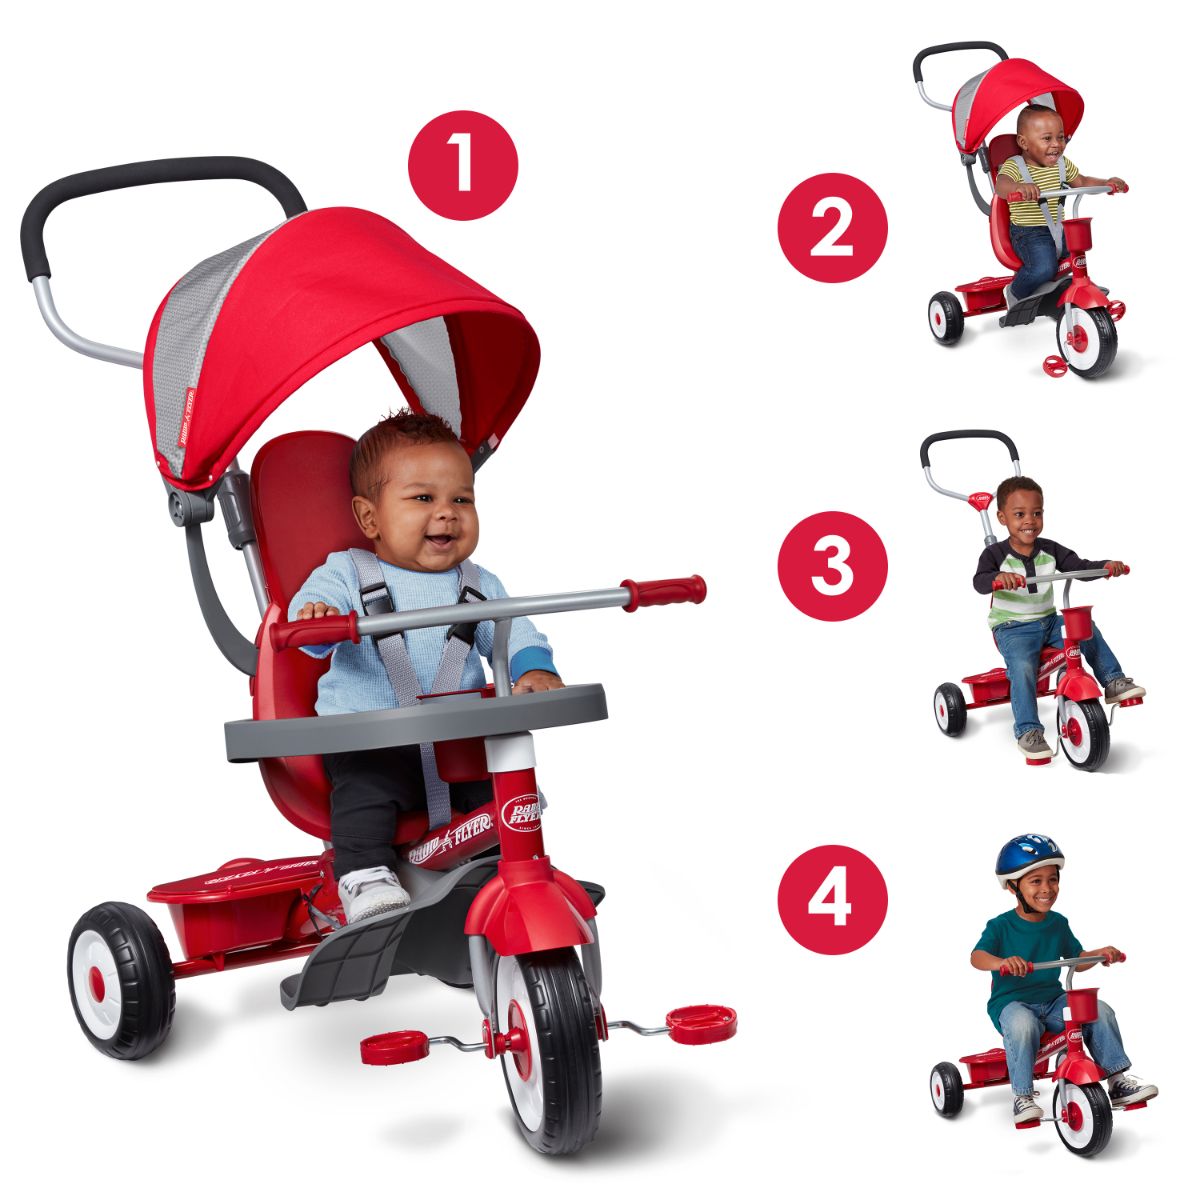 Radio flyer 4 in 1 trike Red